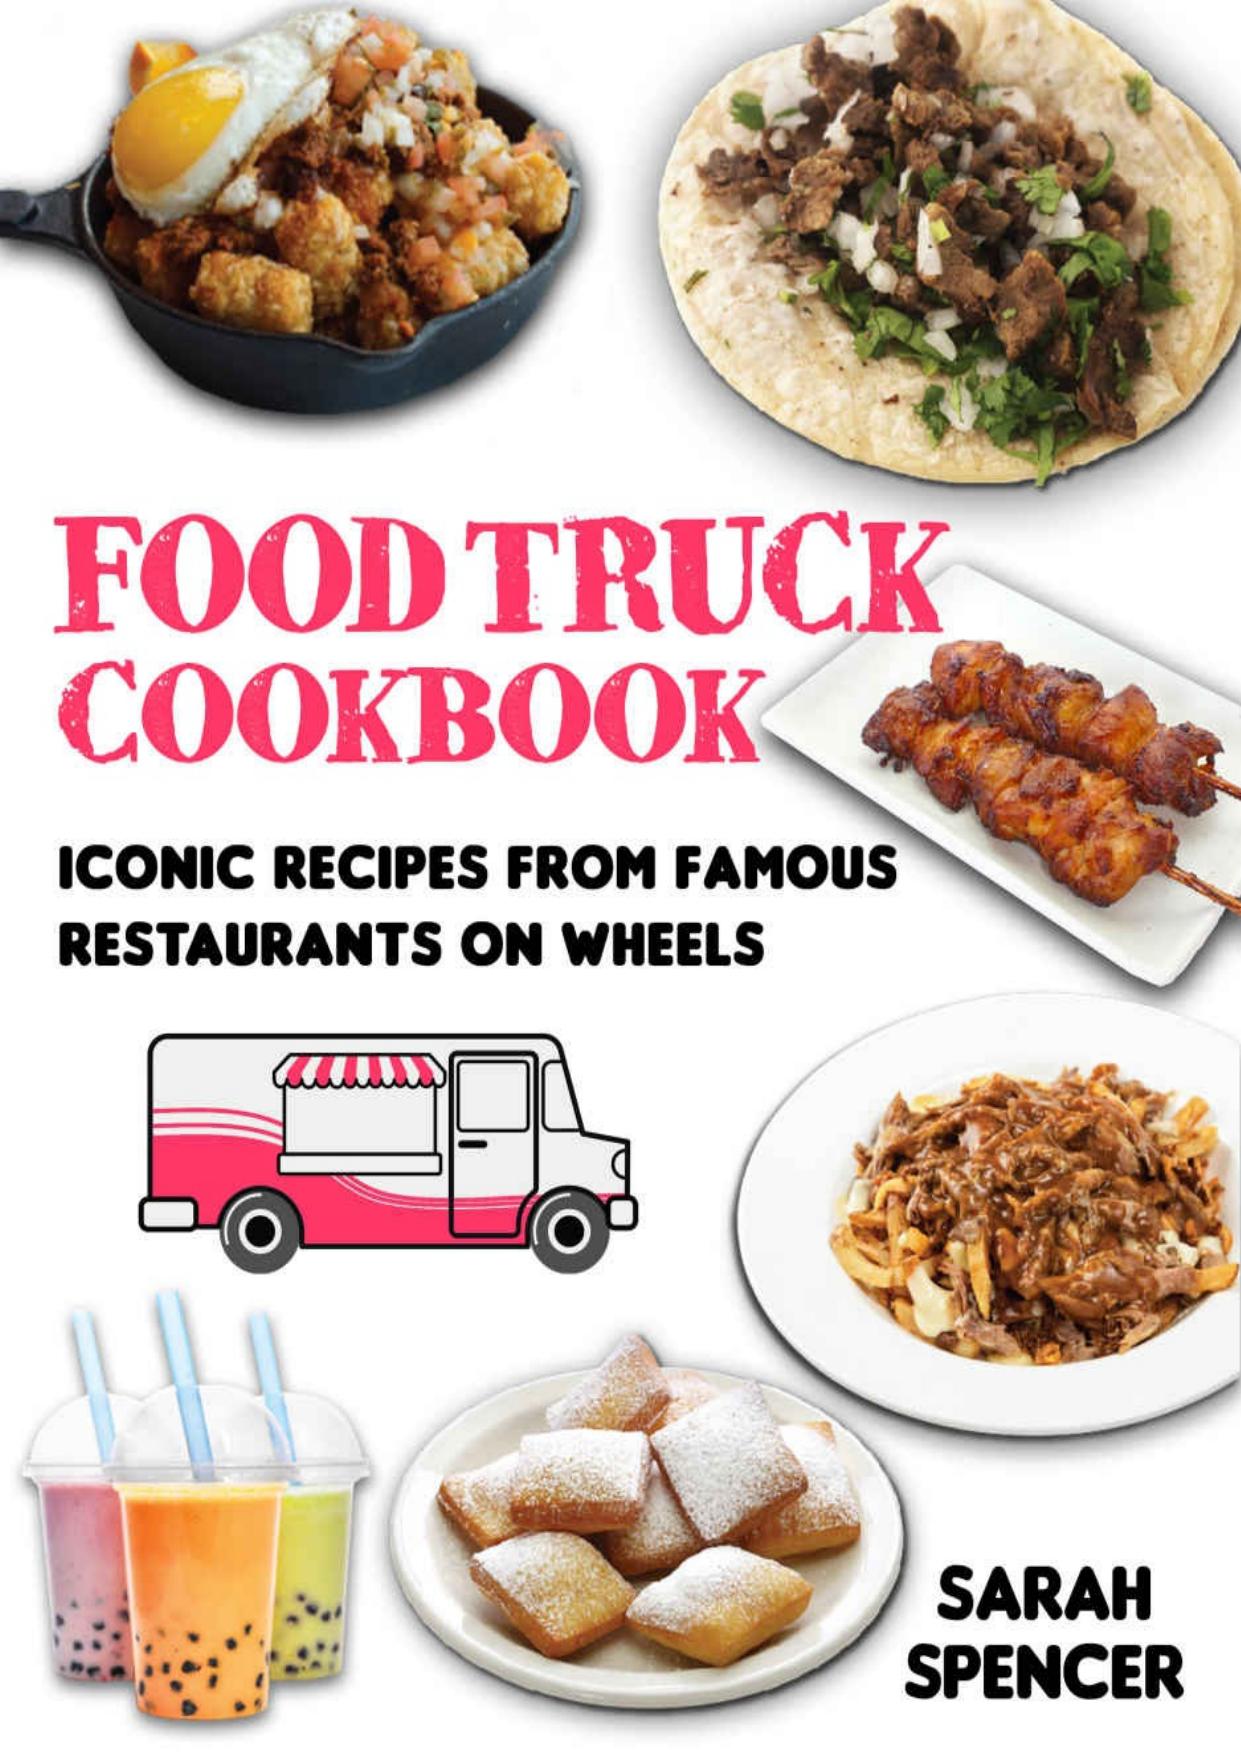 Food Truck Cookbook: Iconic Recipes from Famous Restaurants on Wheels by Sarah Spencer